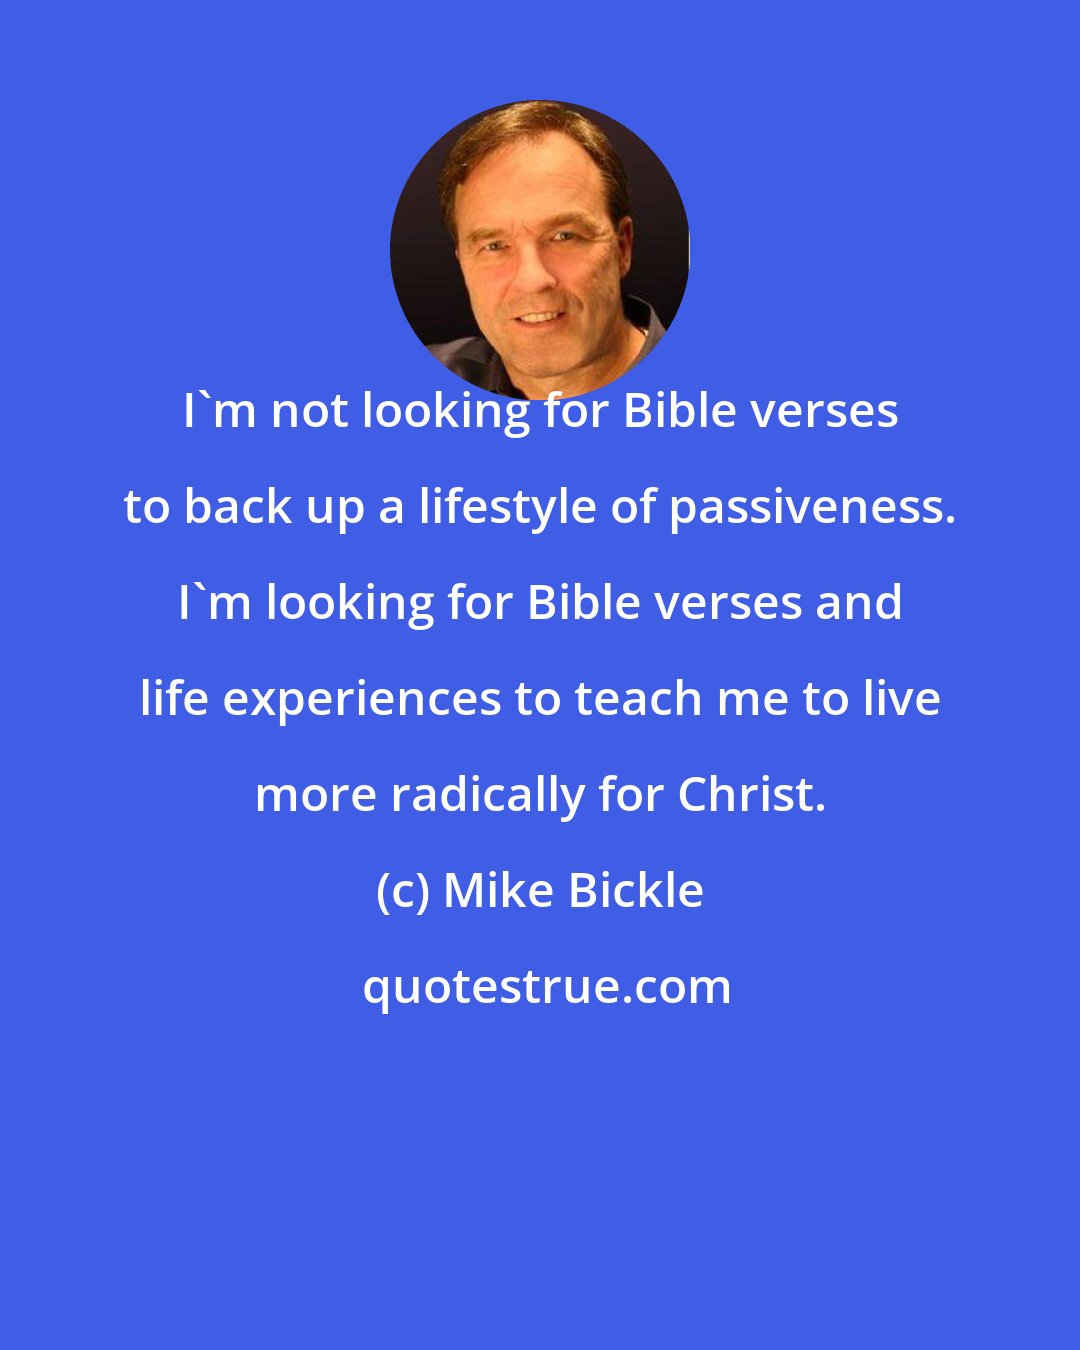 Mike Bickle: I'm not looking for Bible verses to back up a lifestyle of passiveness. I'm looking for Bible verses and life experiences to teach me to live more radically for Christ.